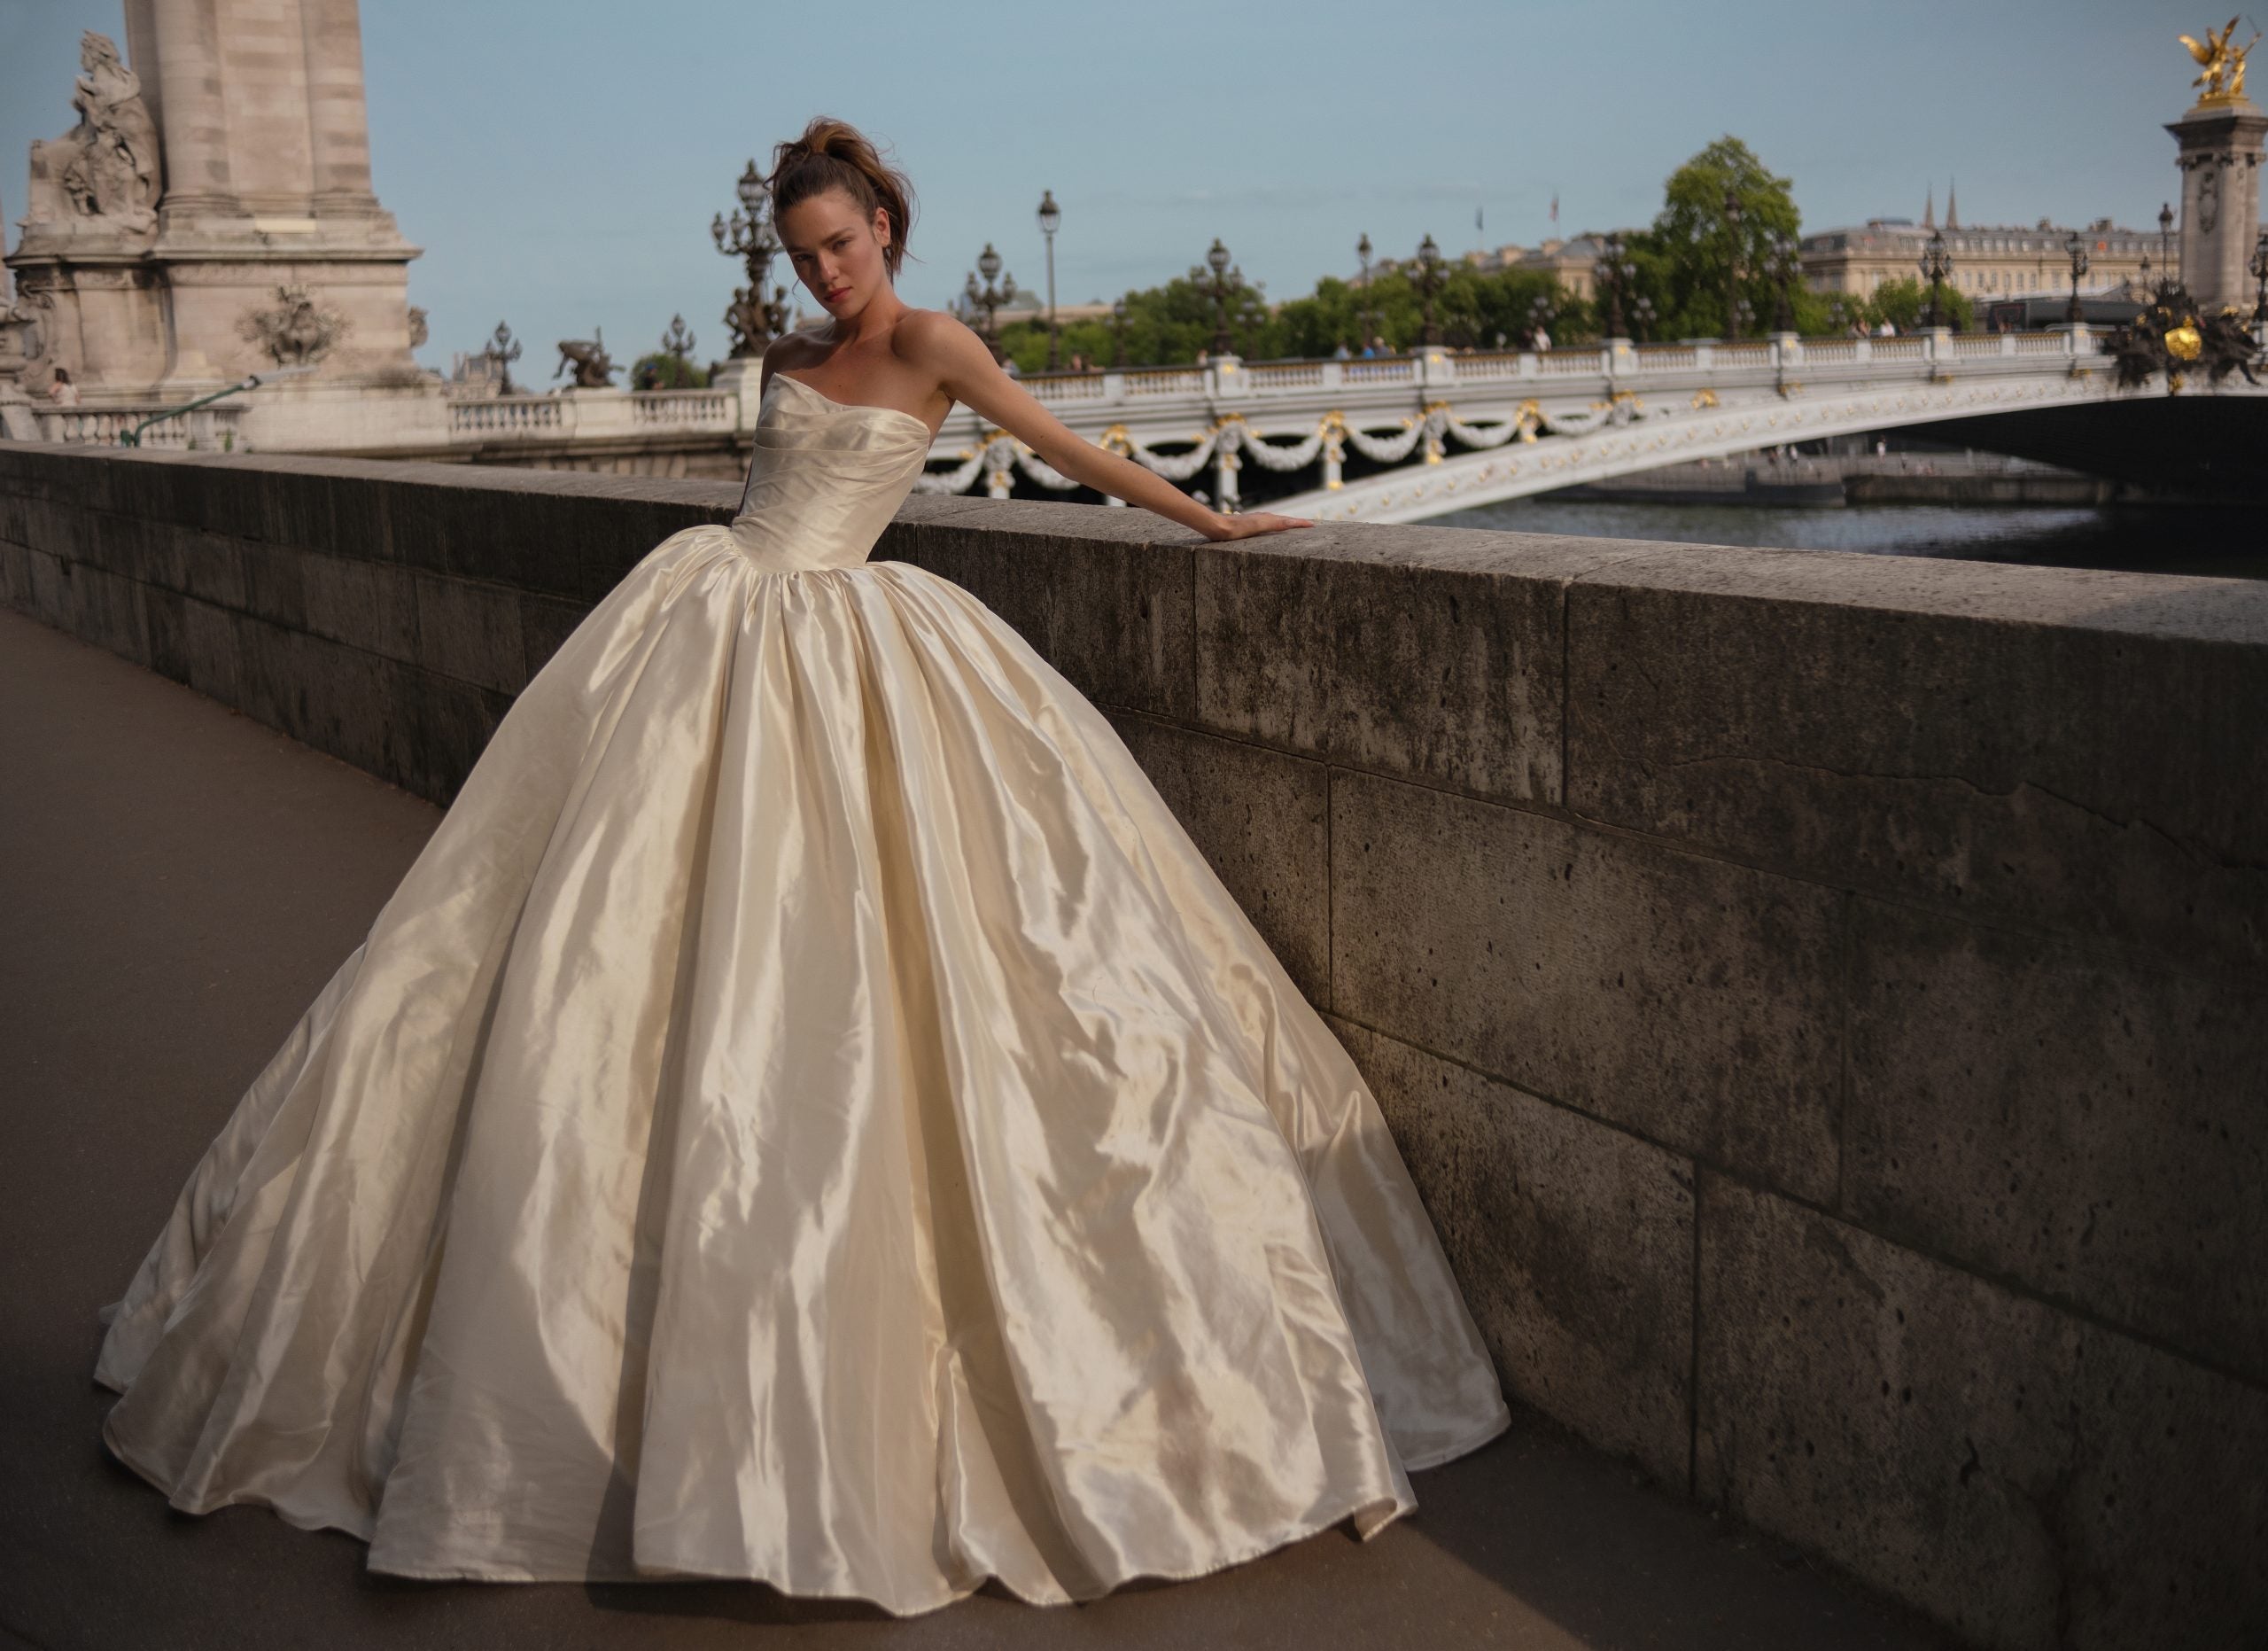 Strapless Ball Gown Wedding Dress by Nicole + Felicia - Image 1